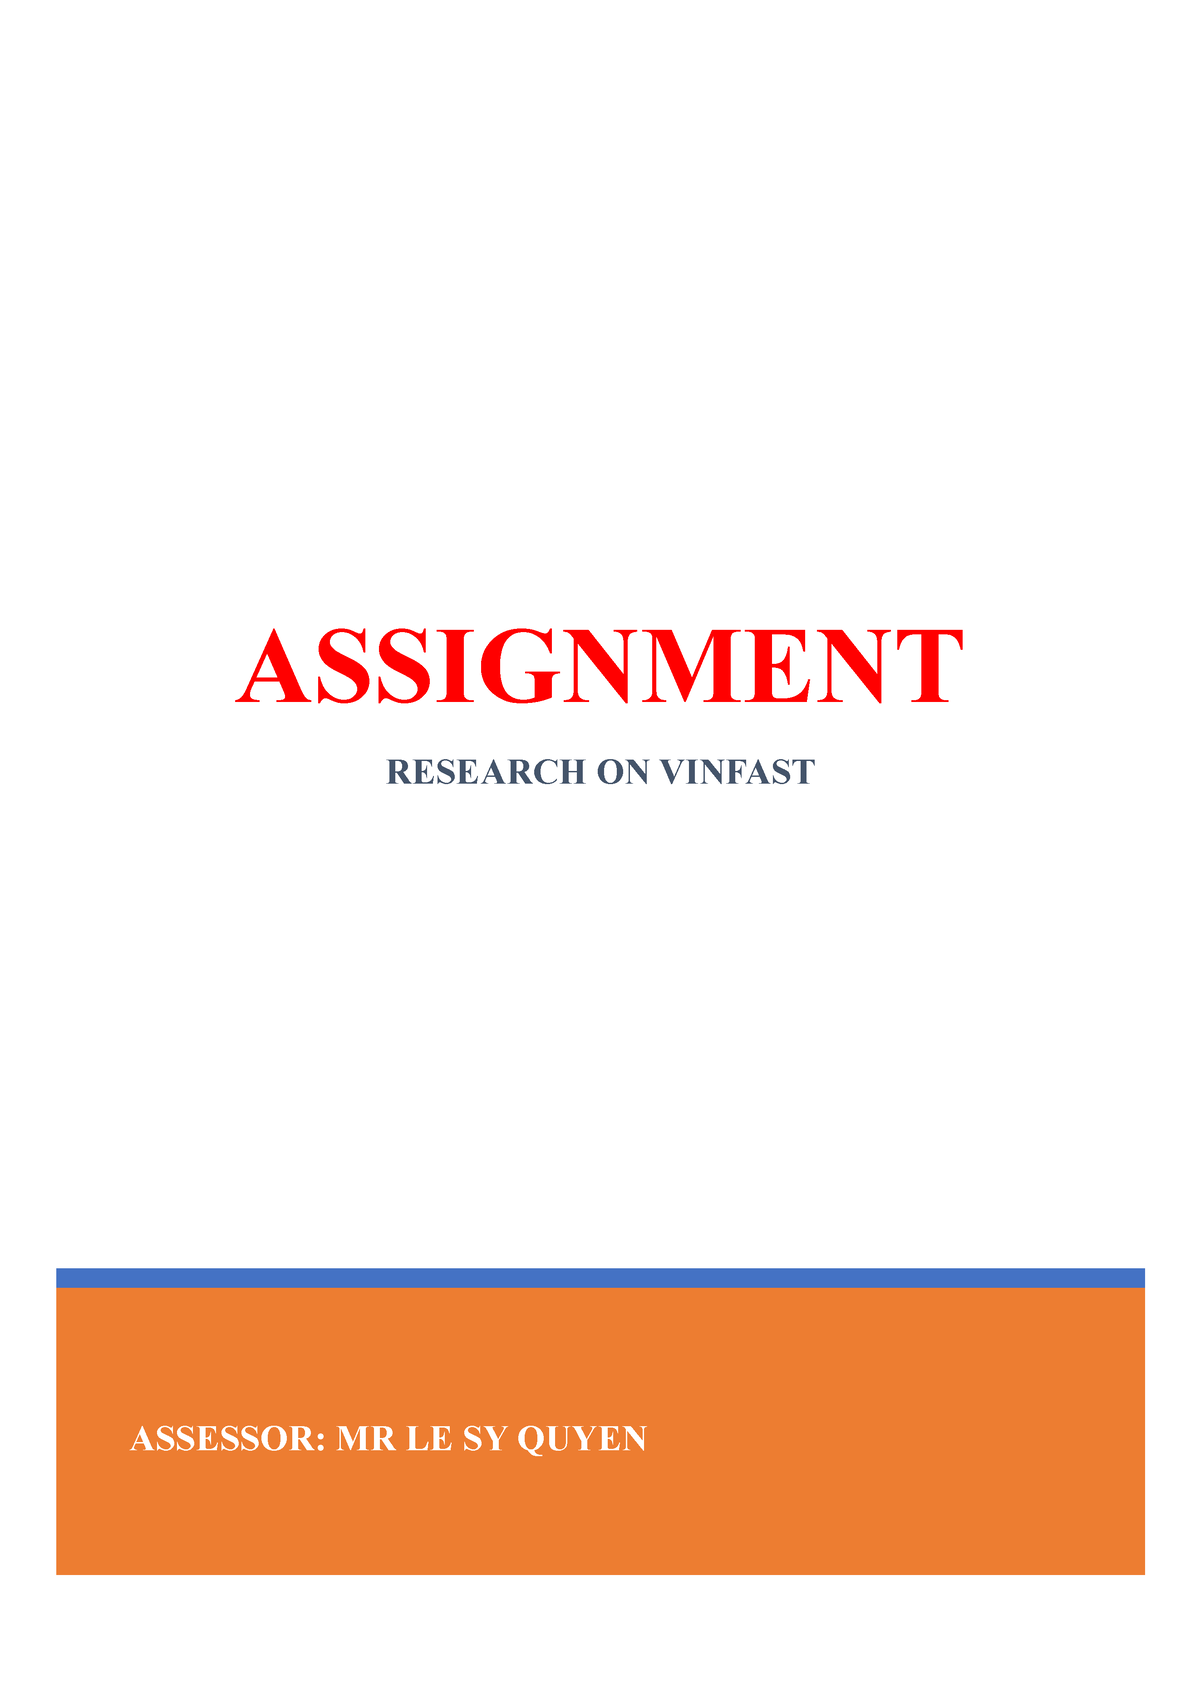 Report MKT-113 Group-3 - ASSESSOR: MR LE SY QUYEN ASSIGNMENT RESEARCH ...